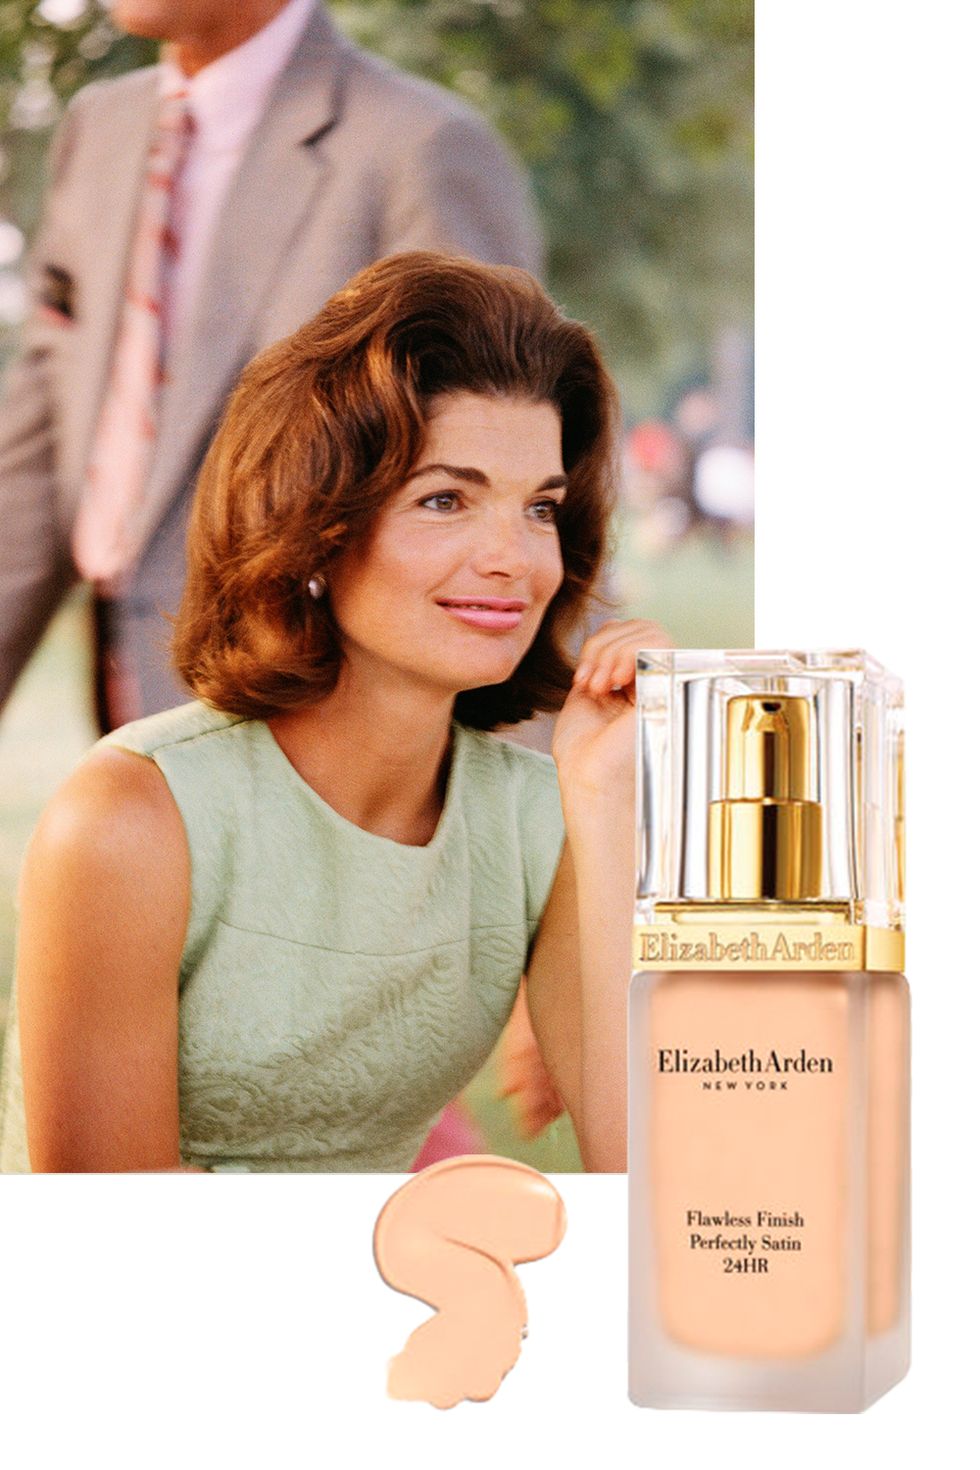 <p>As the&nbsp;former first lady&nbsp;aged, her skin suffered from sun spots, likely the result of her many holidays in the South of France, Greece, and Rhode Island. To cover up the discoloration, she&nbsp;<a href="http://www.vanityfair.com/style/1995/11/jackie-kenedy-199511" target="_blank" data-tracking-id="recirc-text-link">turned</a>&nbsp;to Elizabeth Arden's <span data-verified="redactor" data-redactor-tag="span" style="background-color: initial;" rel="background-color: initial;" data-redactor-style="background-color: initial;"><a href="http://www.elizabetharden.com/flawless-finish-perfectly-satin-1002FFLC000.html?dwvar_1002FFLC000_color=fflc007&amp;cgid=foundation">Flawless Finish Foundation</a>, which gave her a fresh-faced, even</span>&nbsp;complexion.</p>